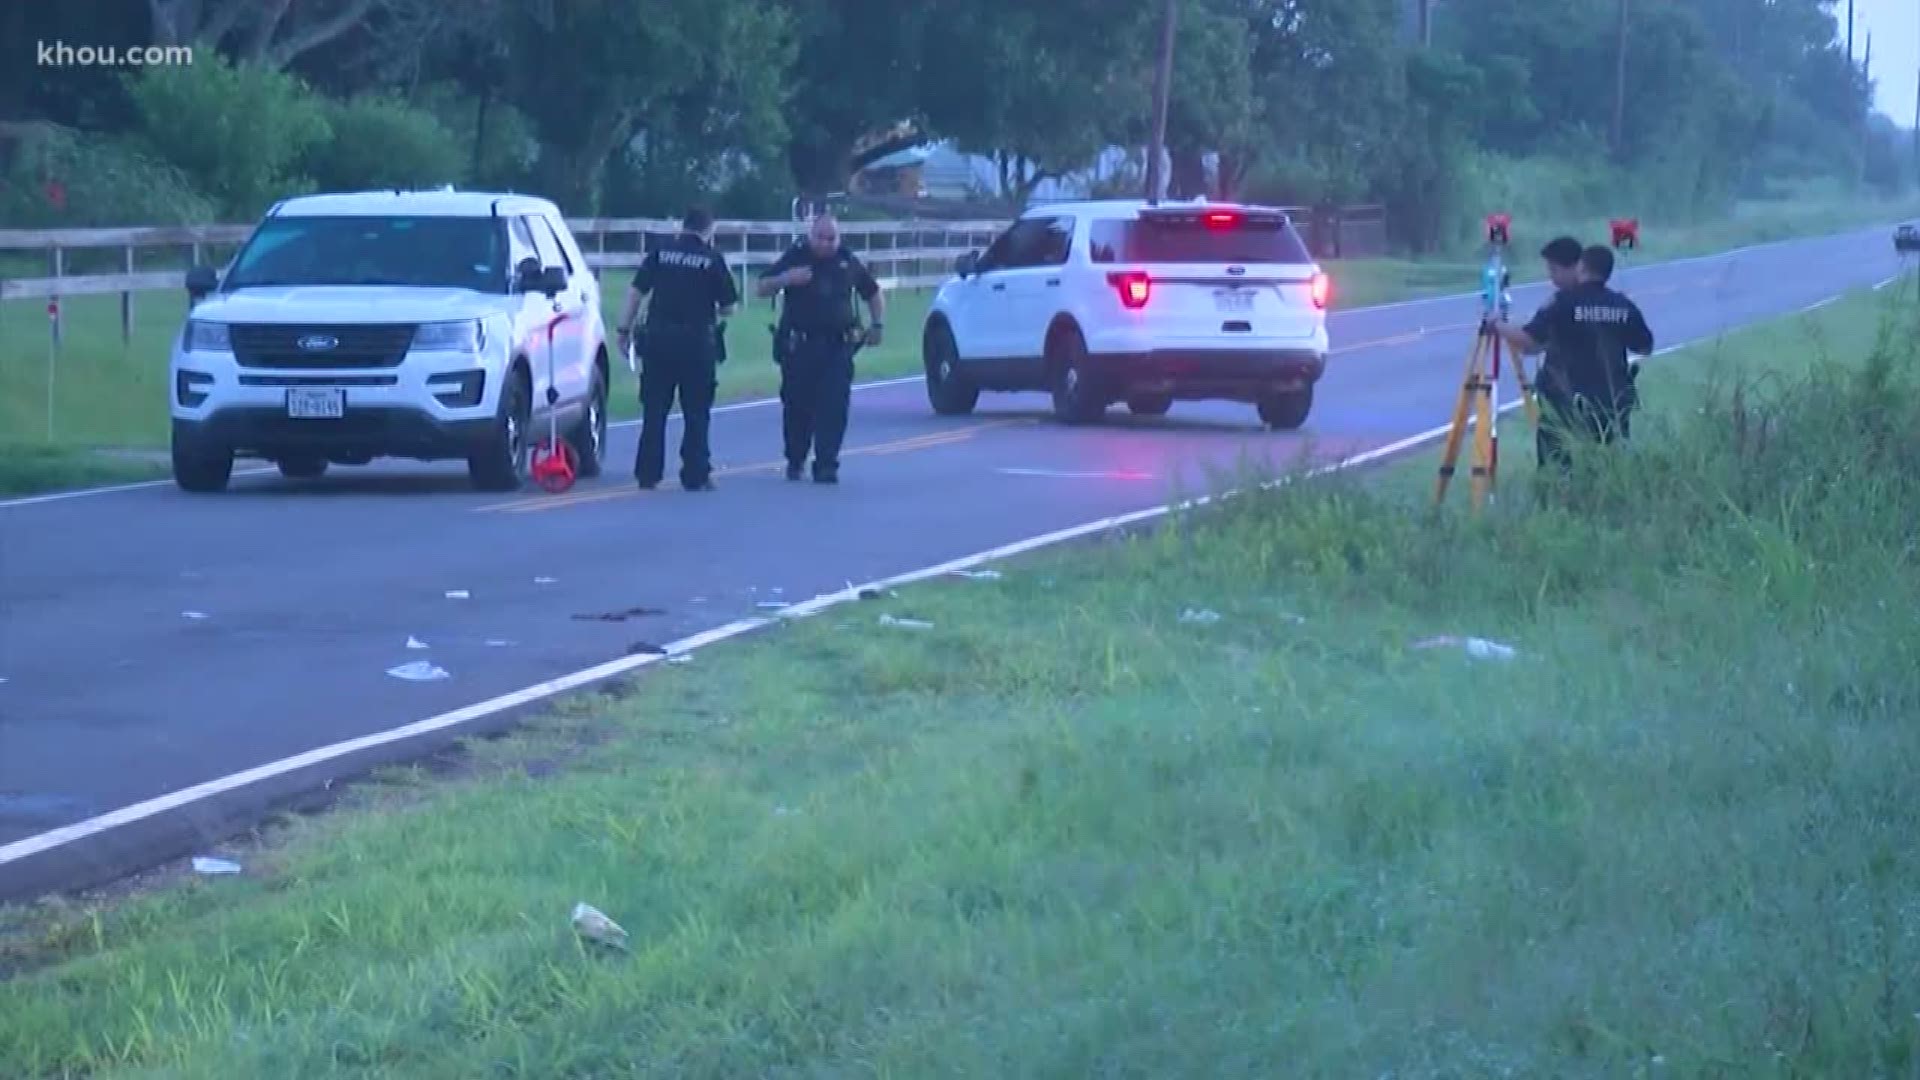 A girl who was fighting for her life after a crash in northwest Harris County has died. The girl was thrown from a car in the early morning hours Friday.